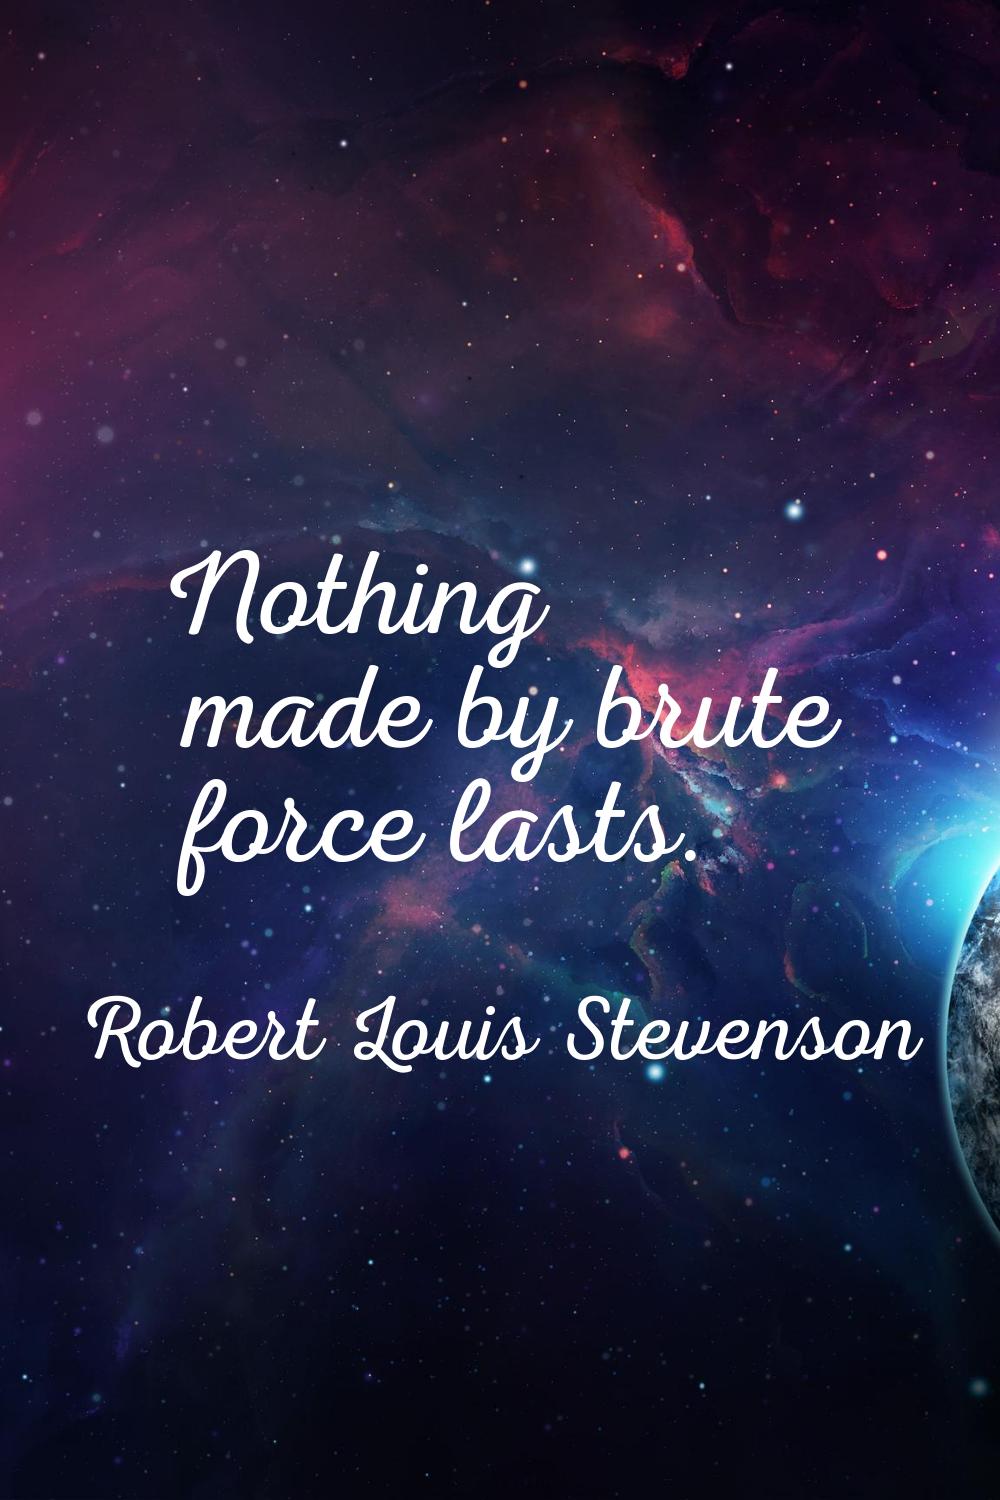 Nothing made by brute force lasts.